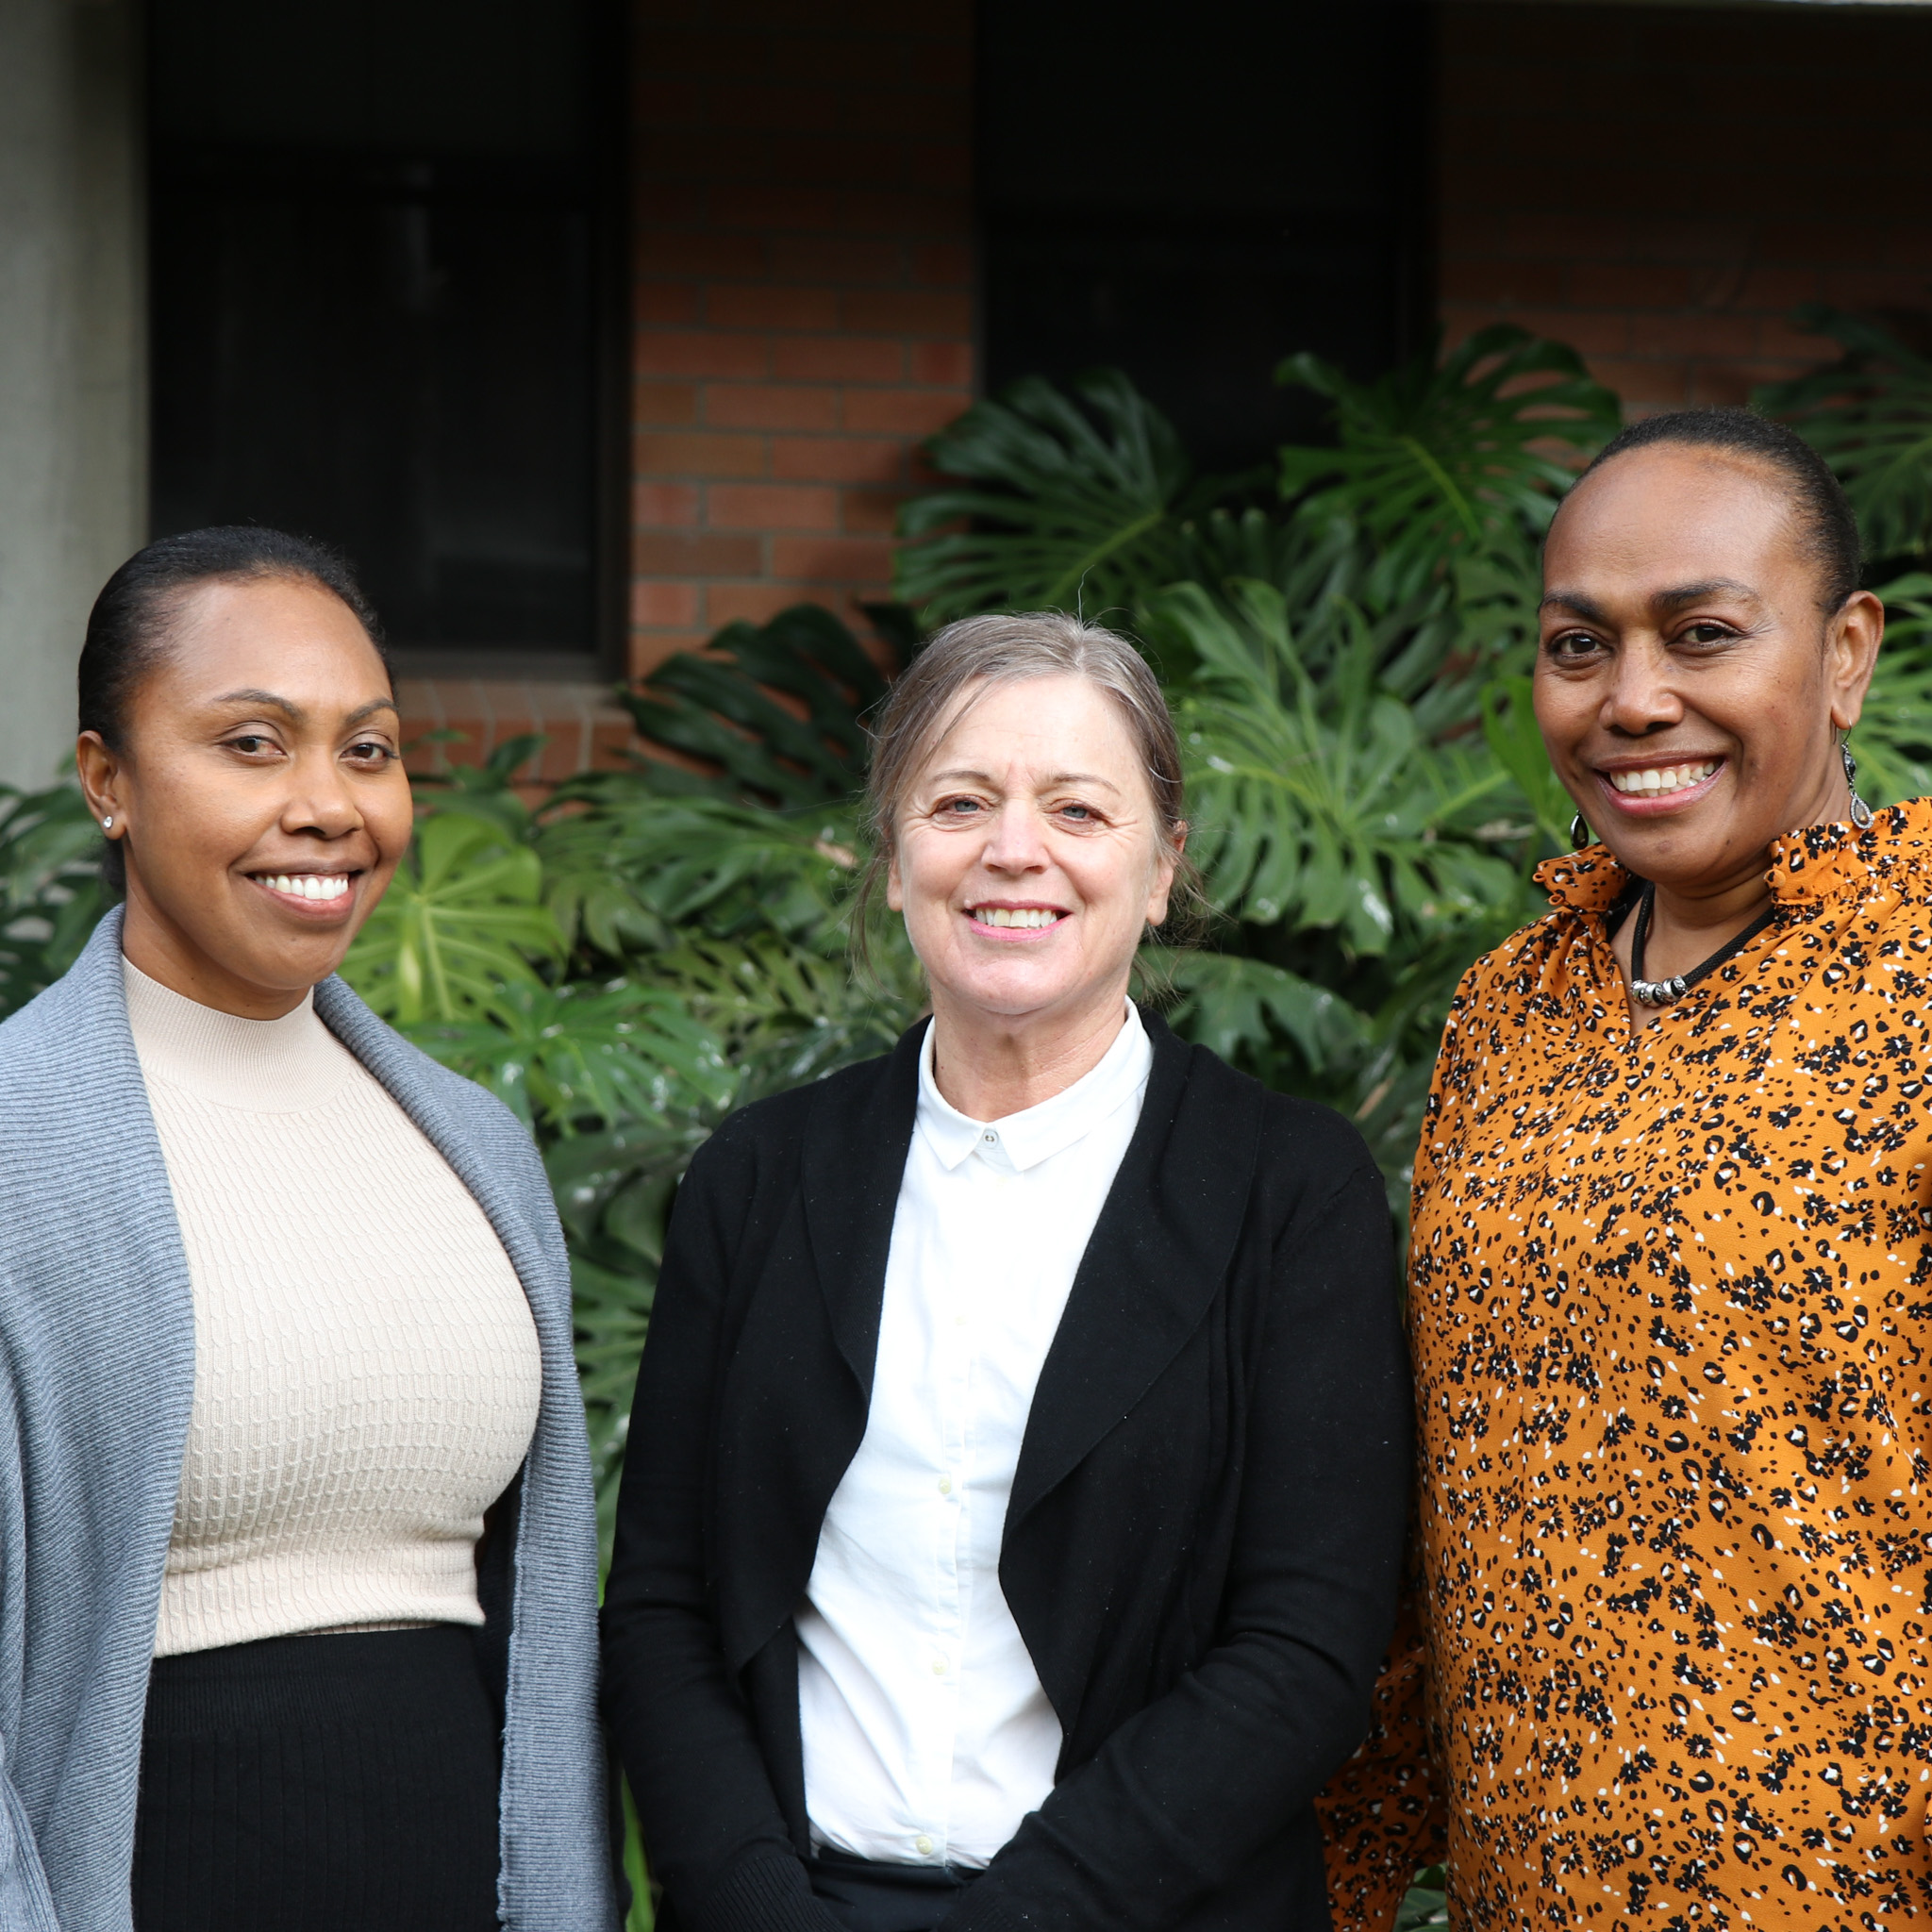 Left to right: Sherol George, Vanuatu Skills Partnership, Dr Angela Page, School of Education, Angelinah Eldads Vira, Ministry of Education and Training^empty:{ds__assetid^as_asset:asset_name}